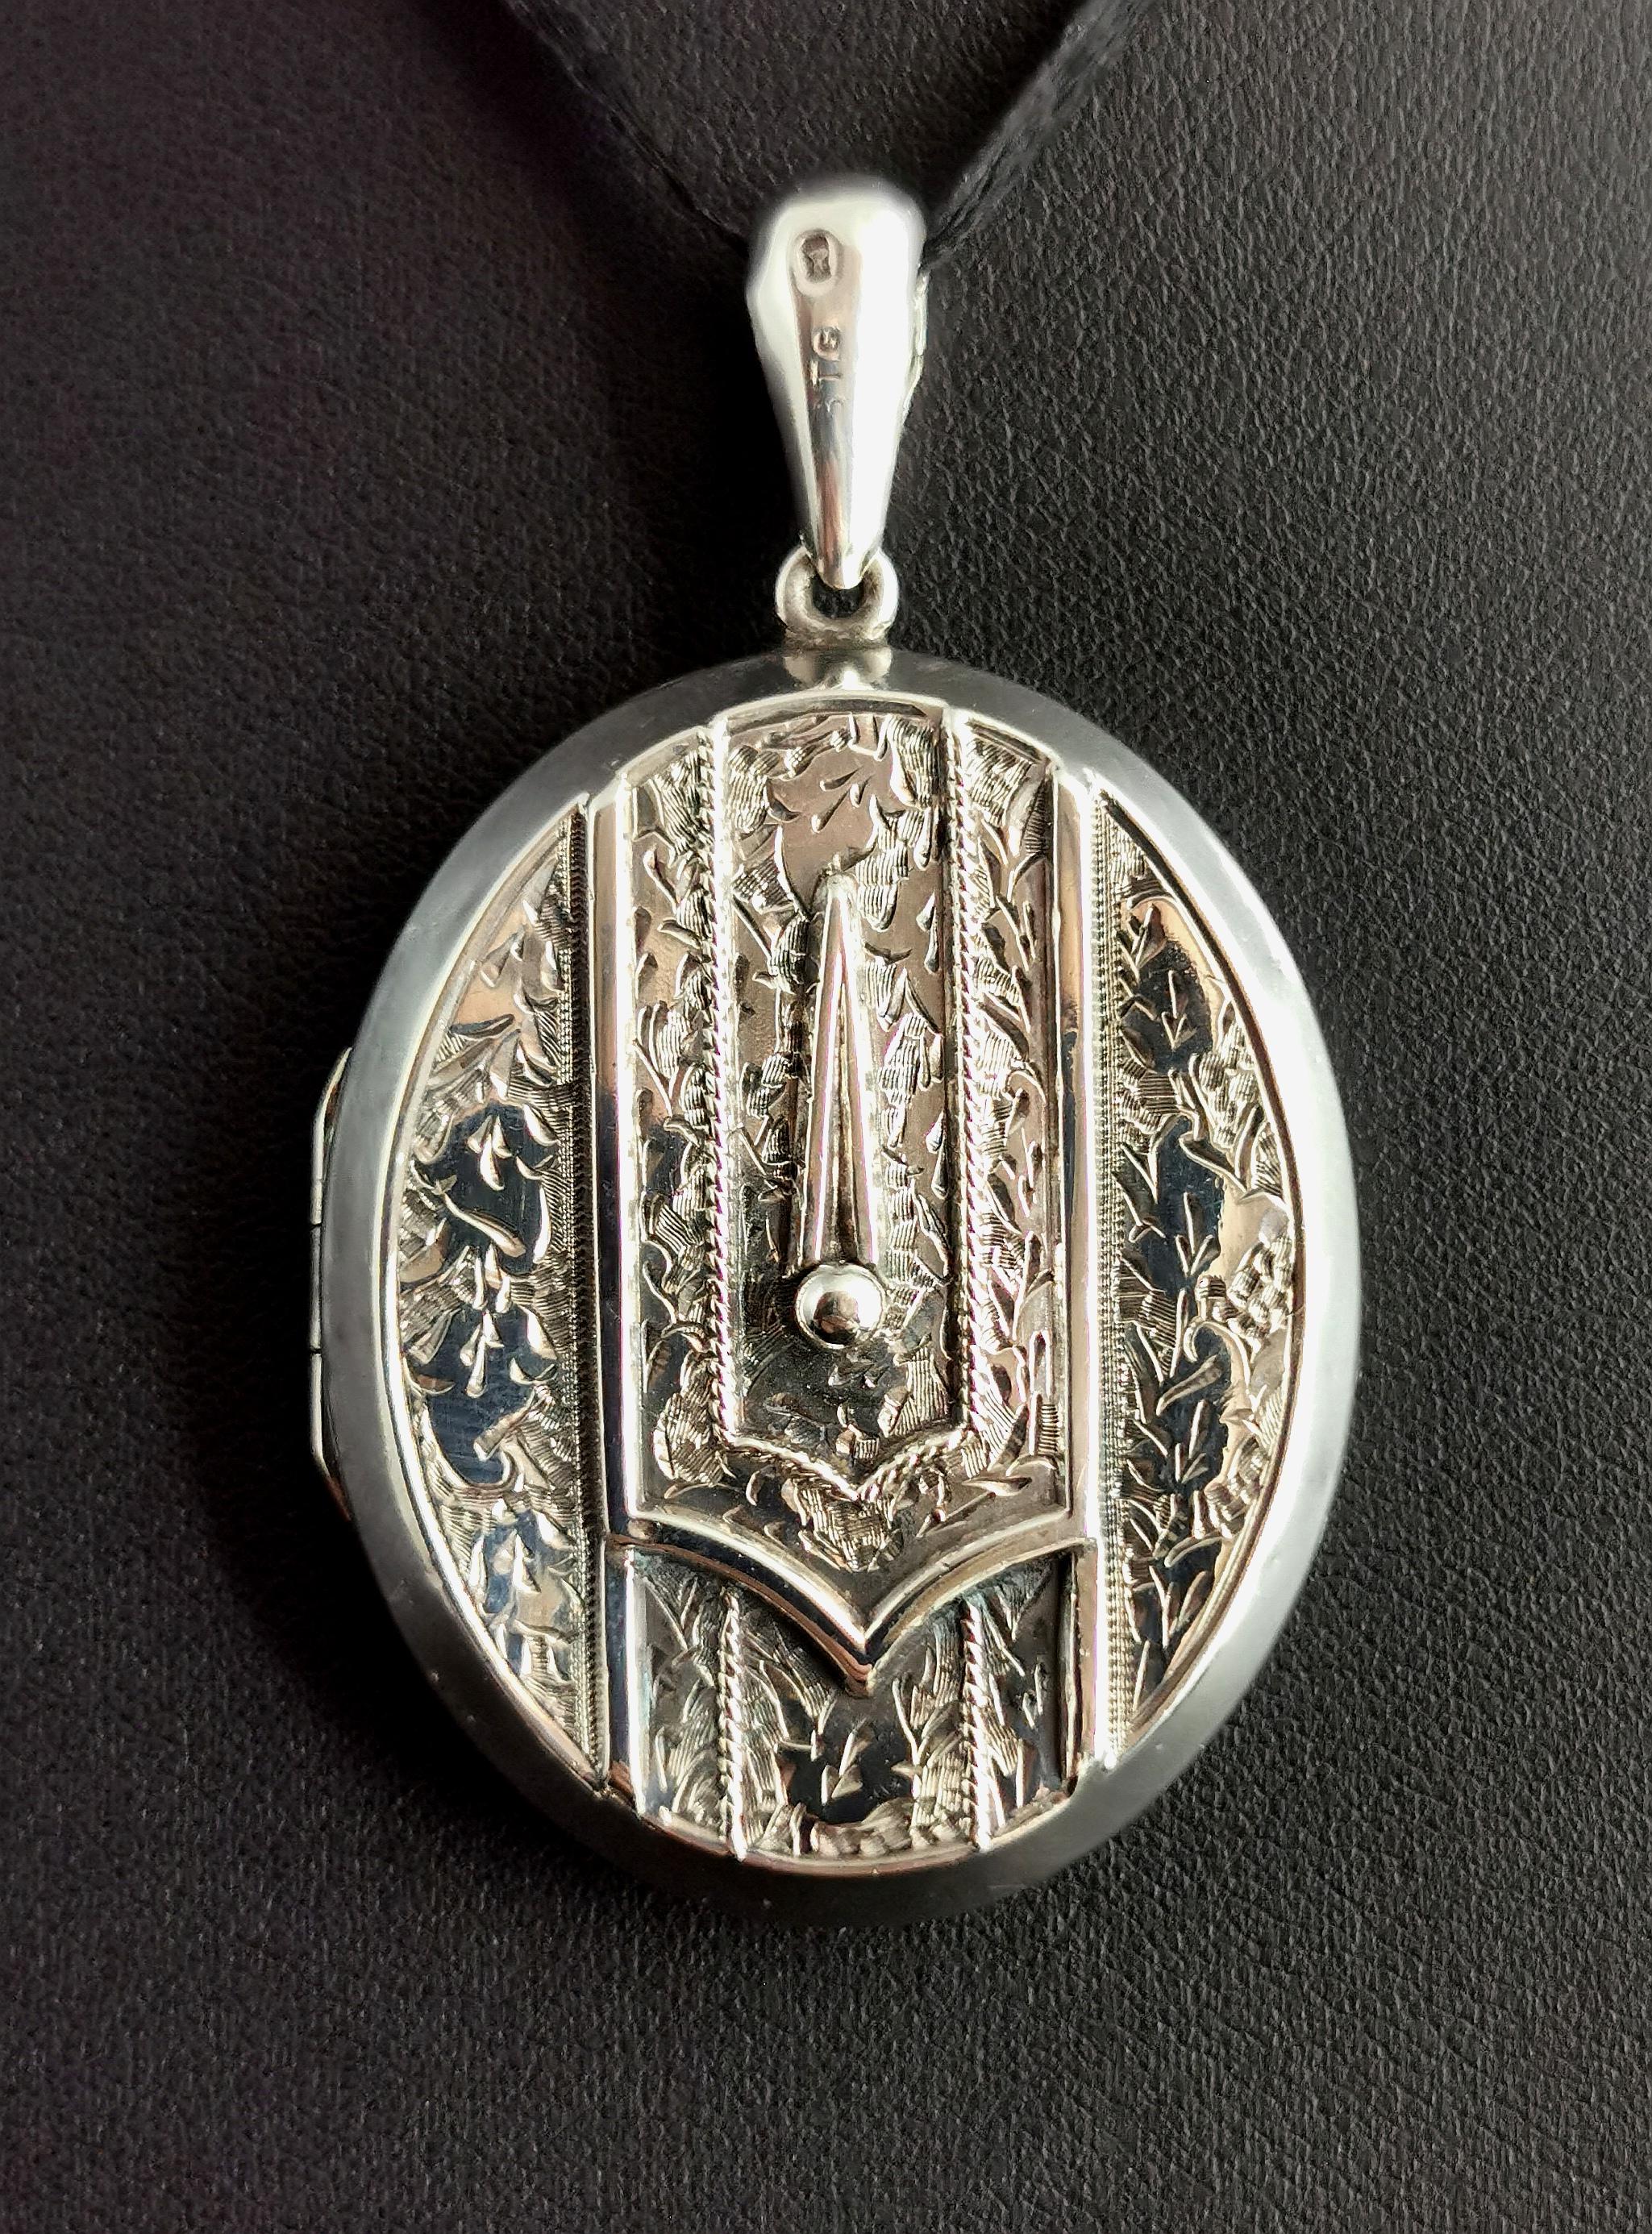 A stunning antique Victorian sterling silver locket pendant.

A large sized oval locket with a very fancy buckle design front with aesthetic style engraving.

It has a large integral bale, perfect for adding to a long antique chain or a choker style